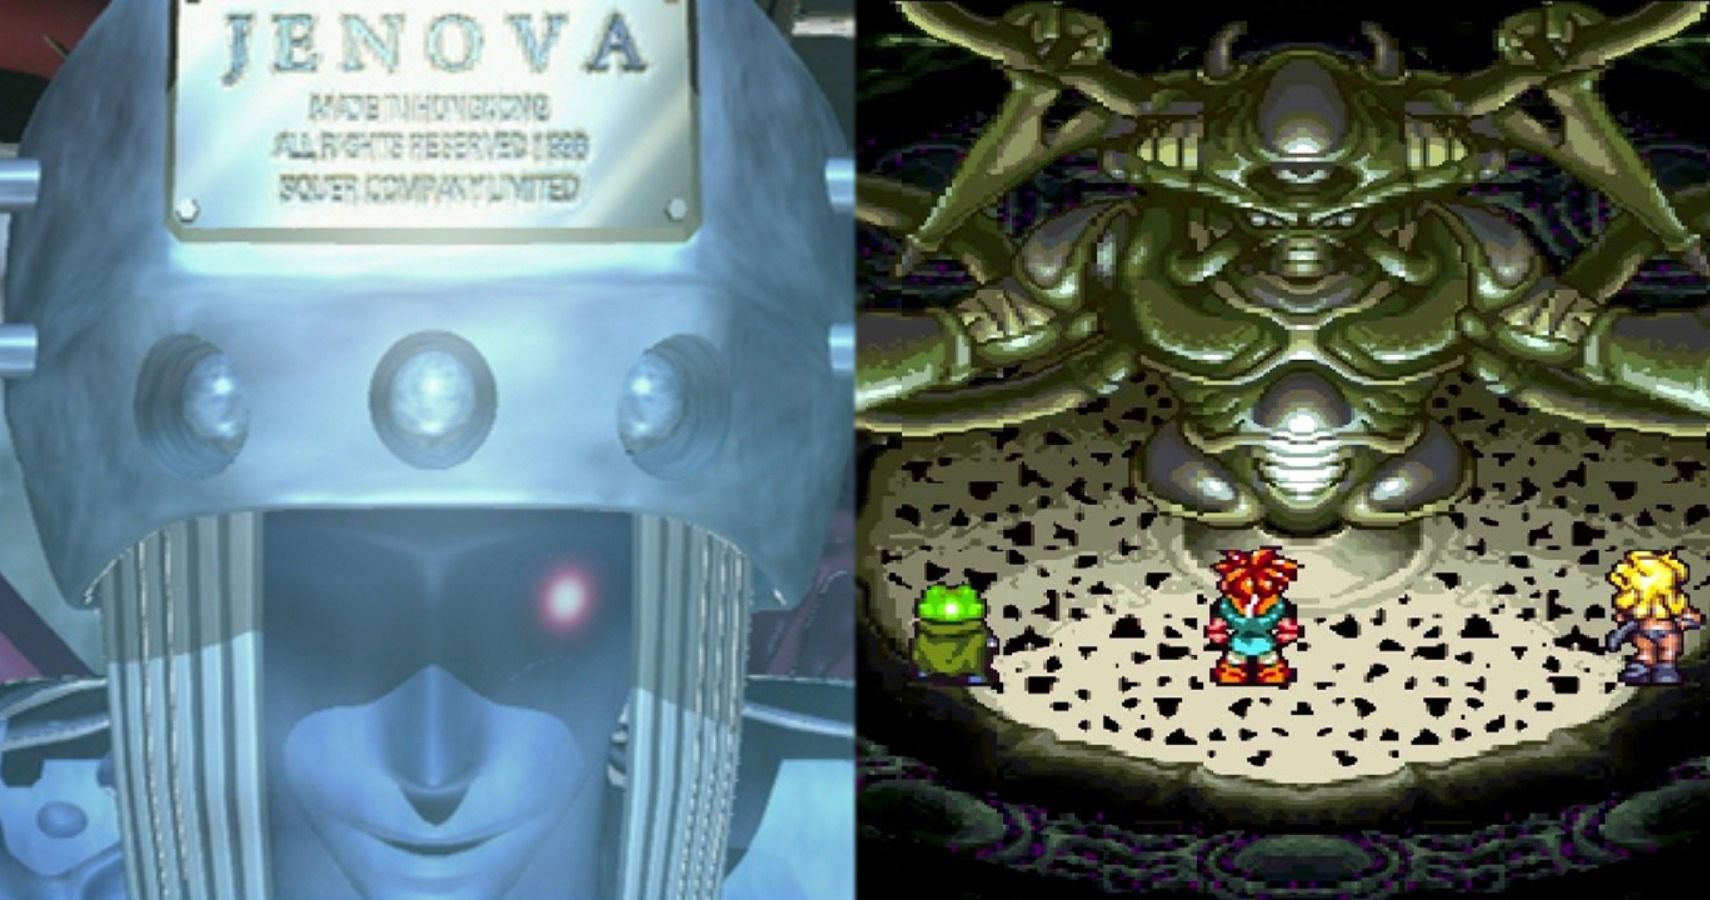 Do Jenova From Final Fantasy VII & Lavos From Chrono Trigger Belong To The Same Species